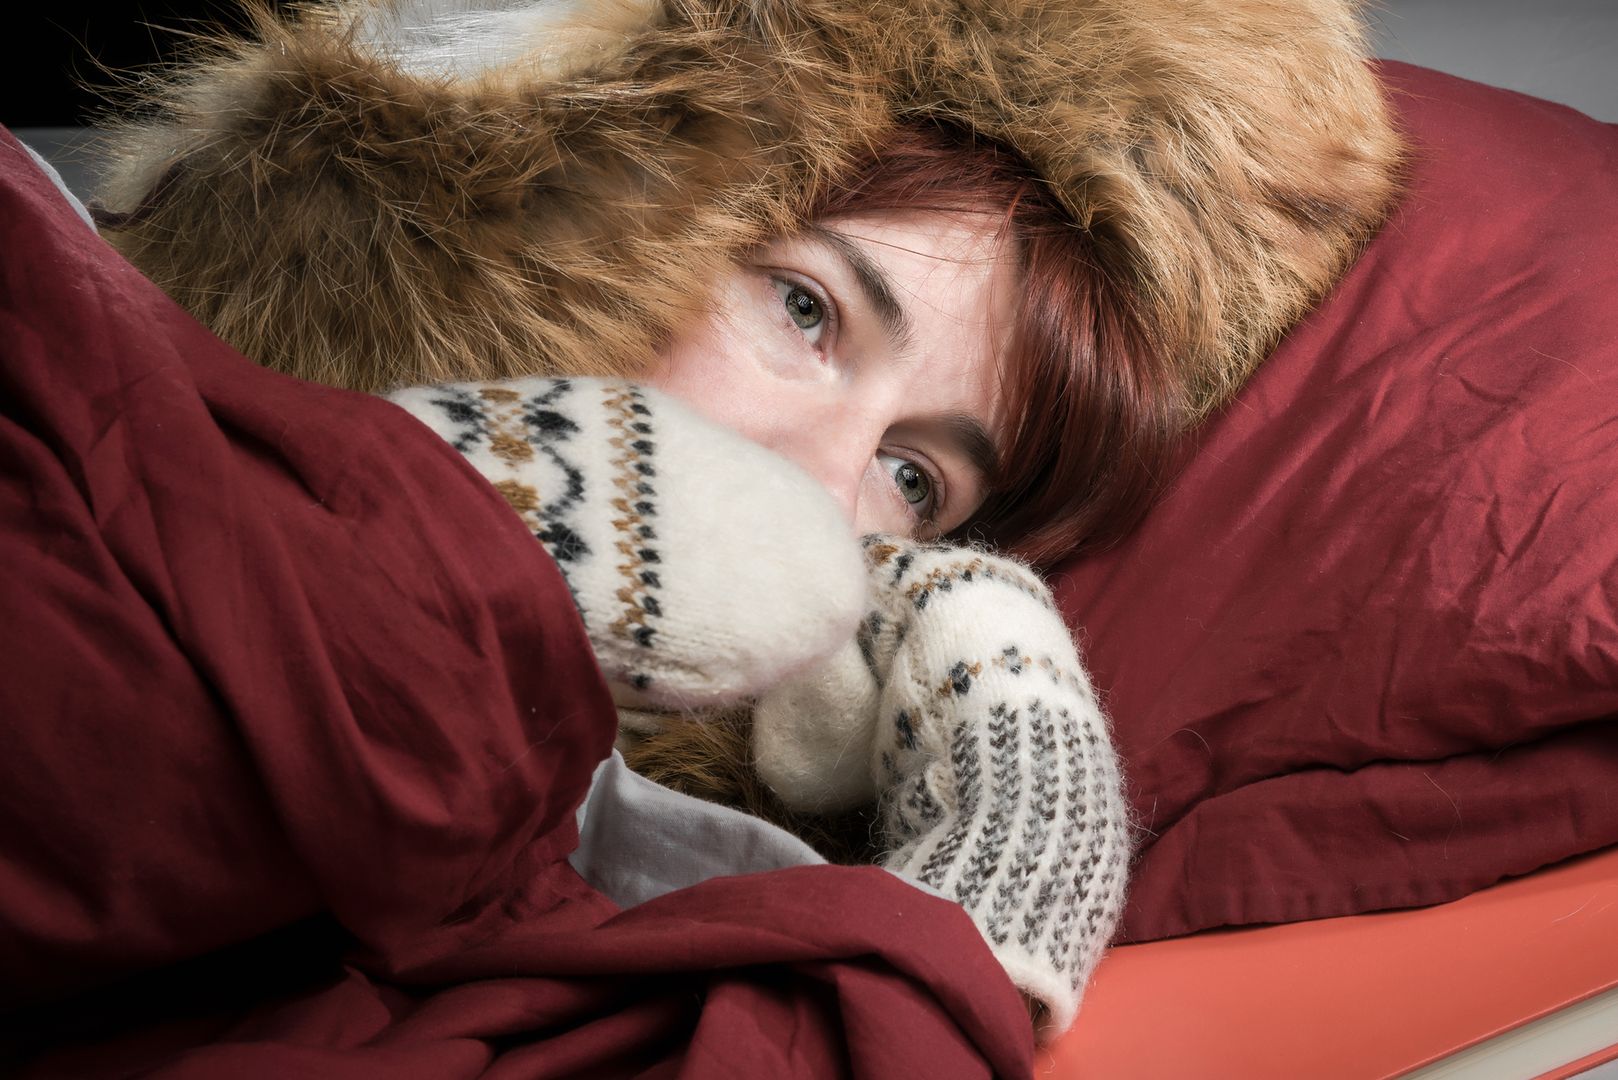 Woman lying in a bed wearing fur hat and mittens and freezing.